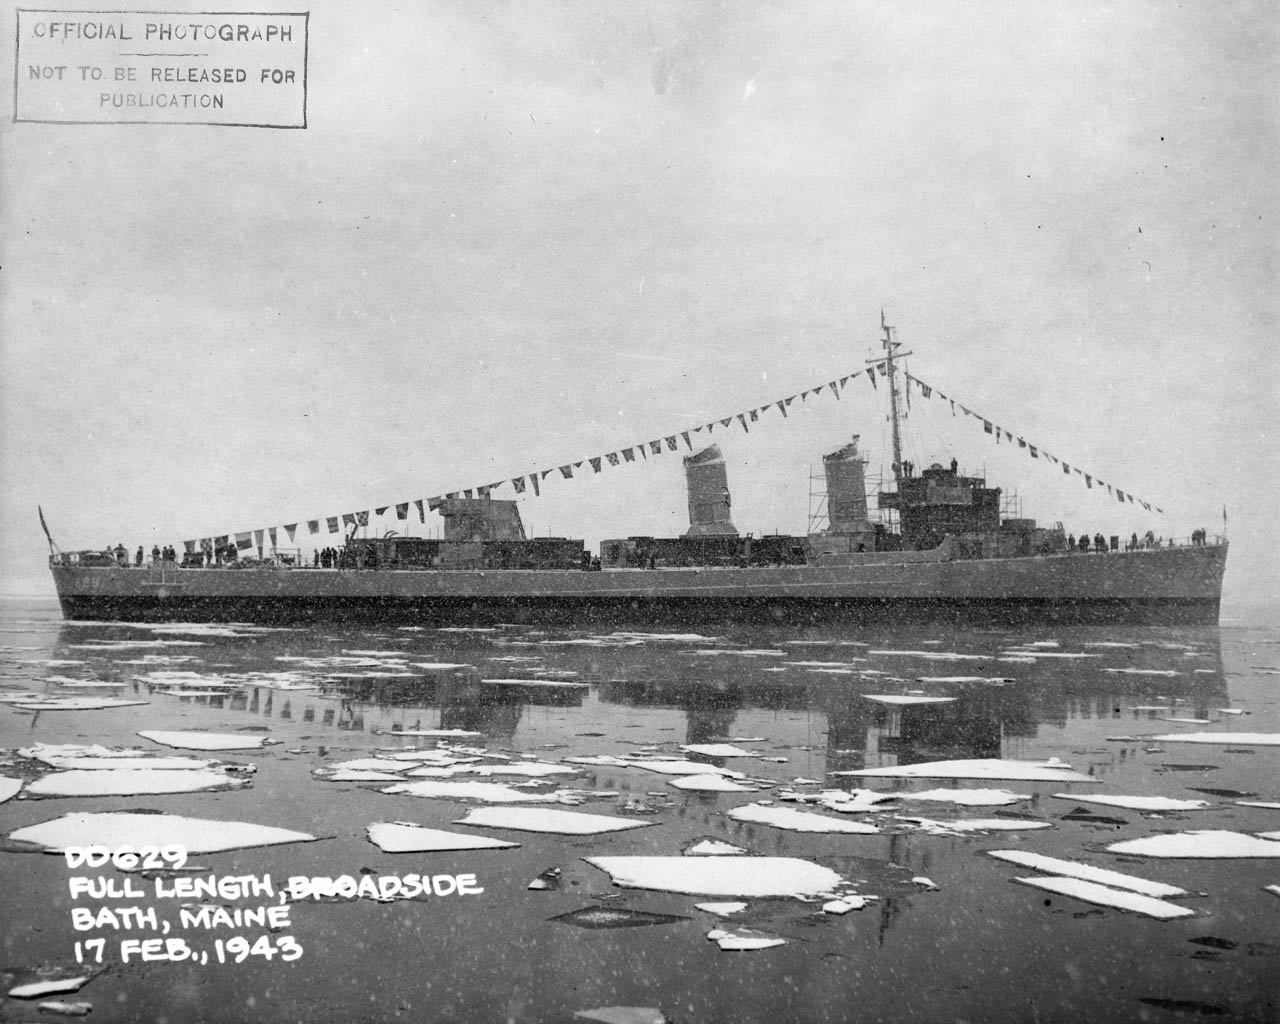 Abbot Launched 1943